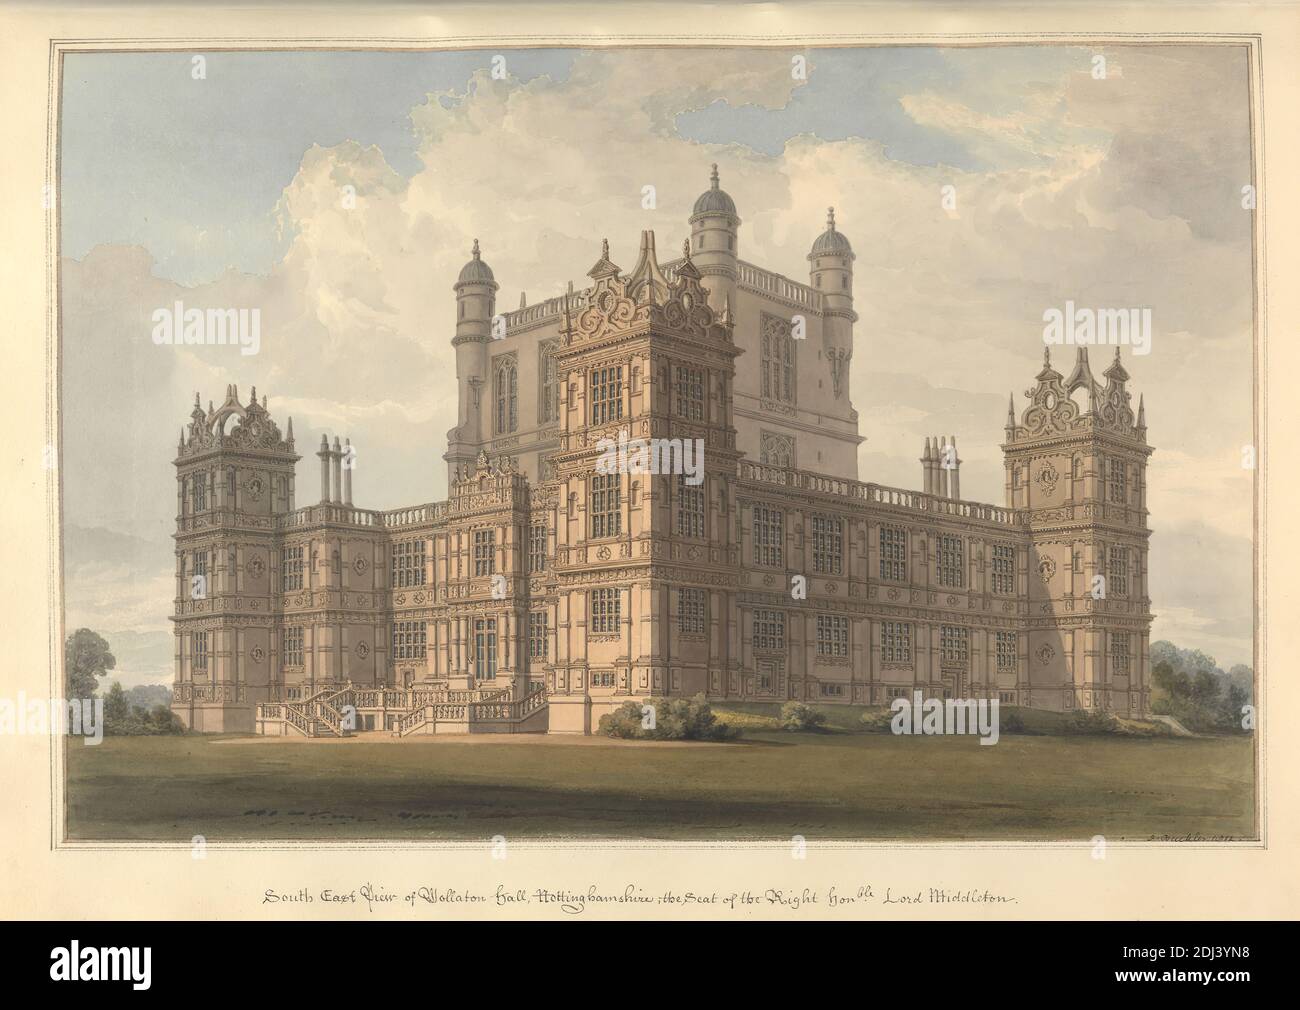 South East view of Wollaton hall, Nottinghamshire, the Seat of the Right honble. Lord Middleton, John Buckler FSA, 1770–1851, British, and John Chessell Buckler, 1793–1894, British, 1812, Watercolor and pen and black ink on moderately thick, cream wove paper, Sheet: 14 × 19 3/4 inches (35.6 × 50.2 cm) and Image: 12 × 18 inches (30.5 × 45.7 cm), architectural subject, balustrades, country house, Elizabethan, Jacobean, mullions, muntins, pilasters, turrets, windows, England, Europe, Nottinghamshire, United Kingdom, Wollaton Stock Photo